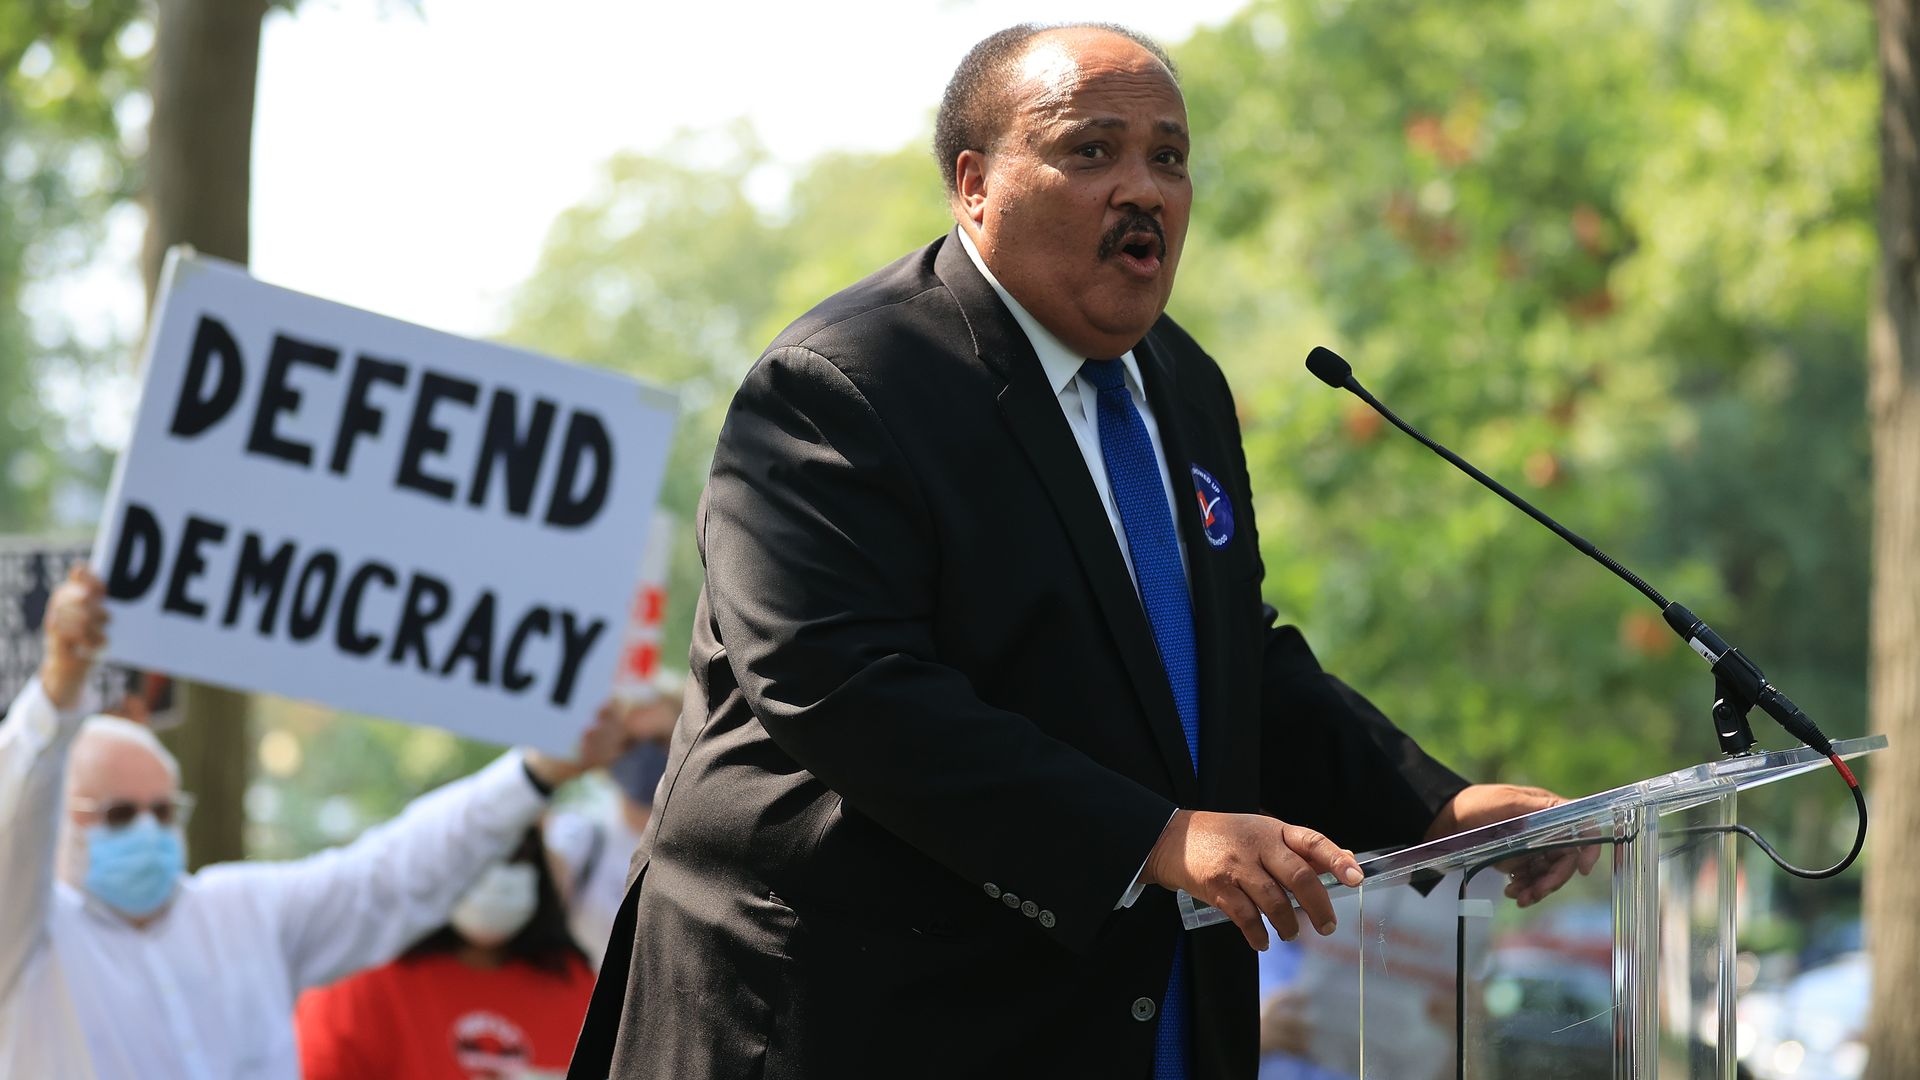 Martin Luther King III is seen speaking at a rally.